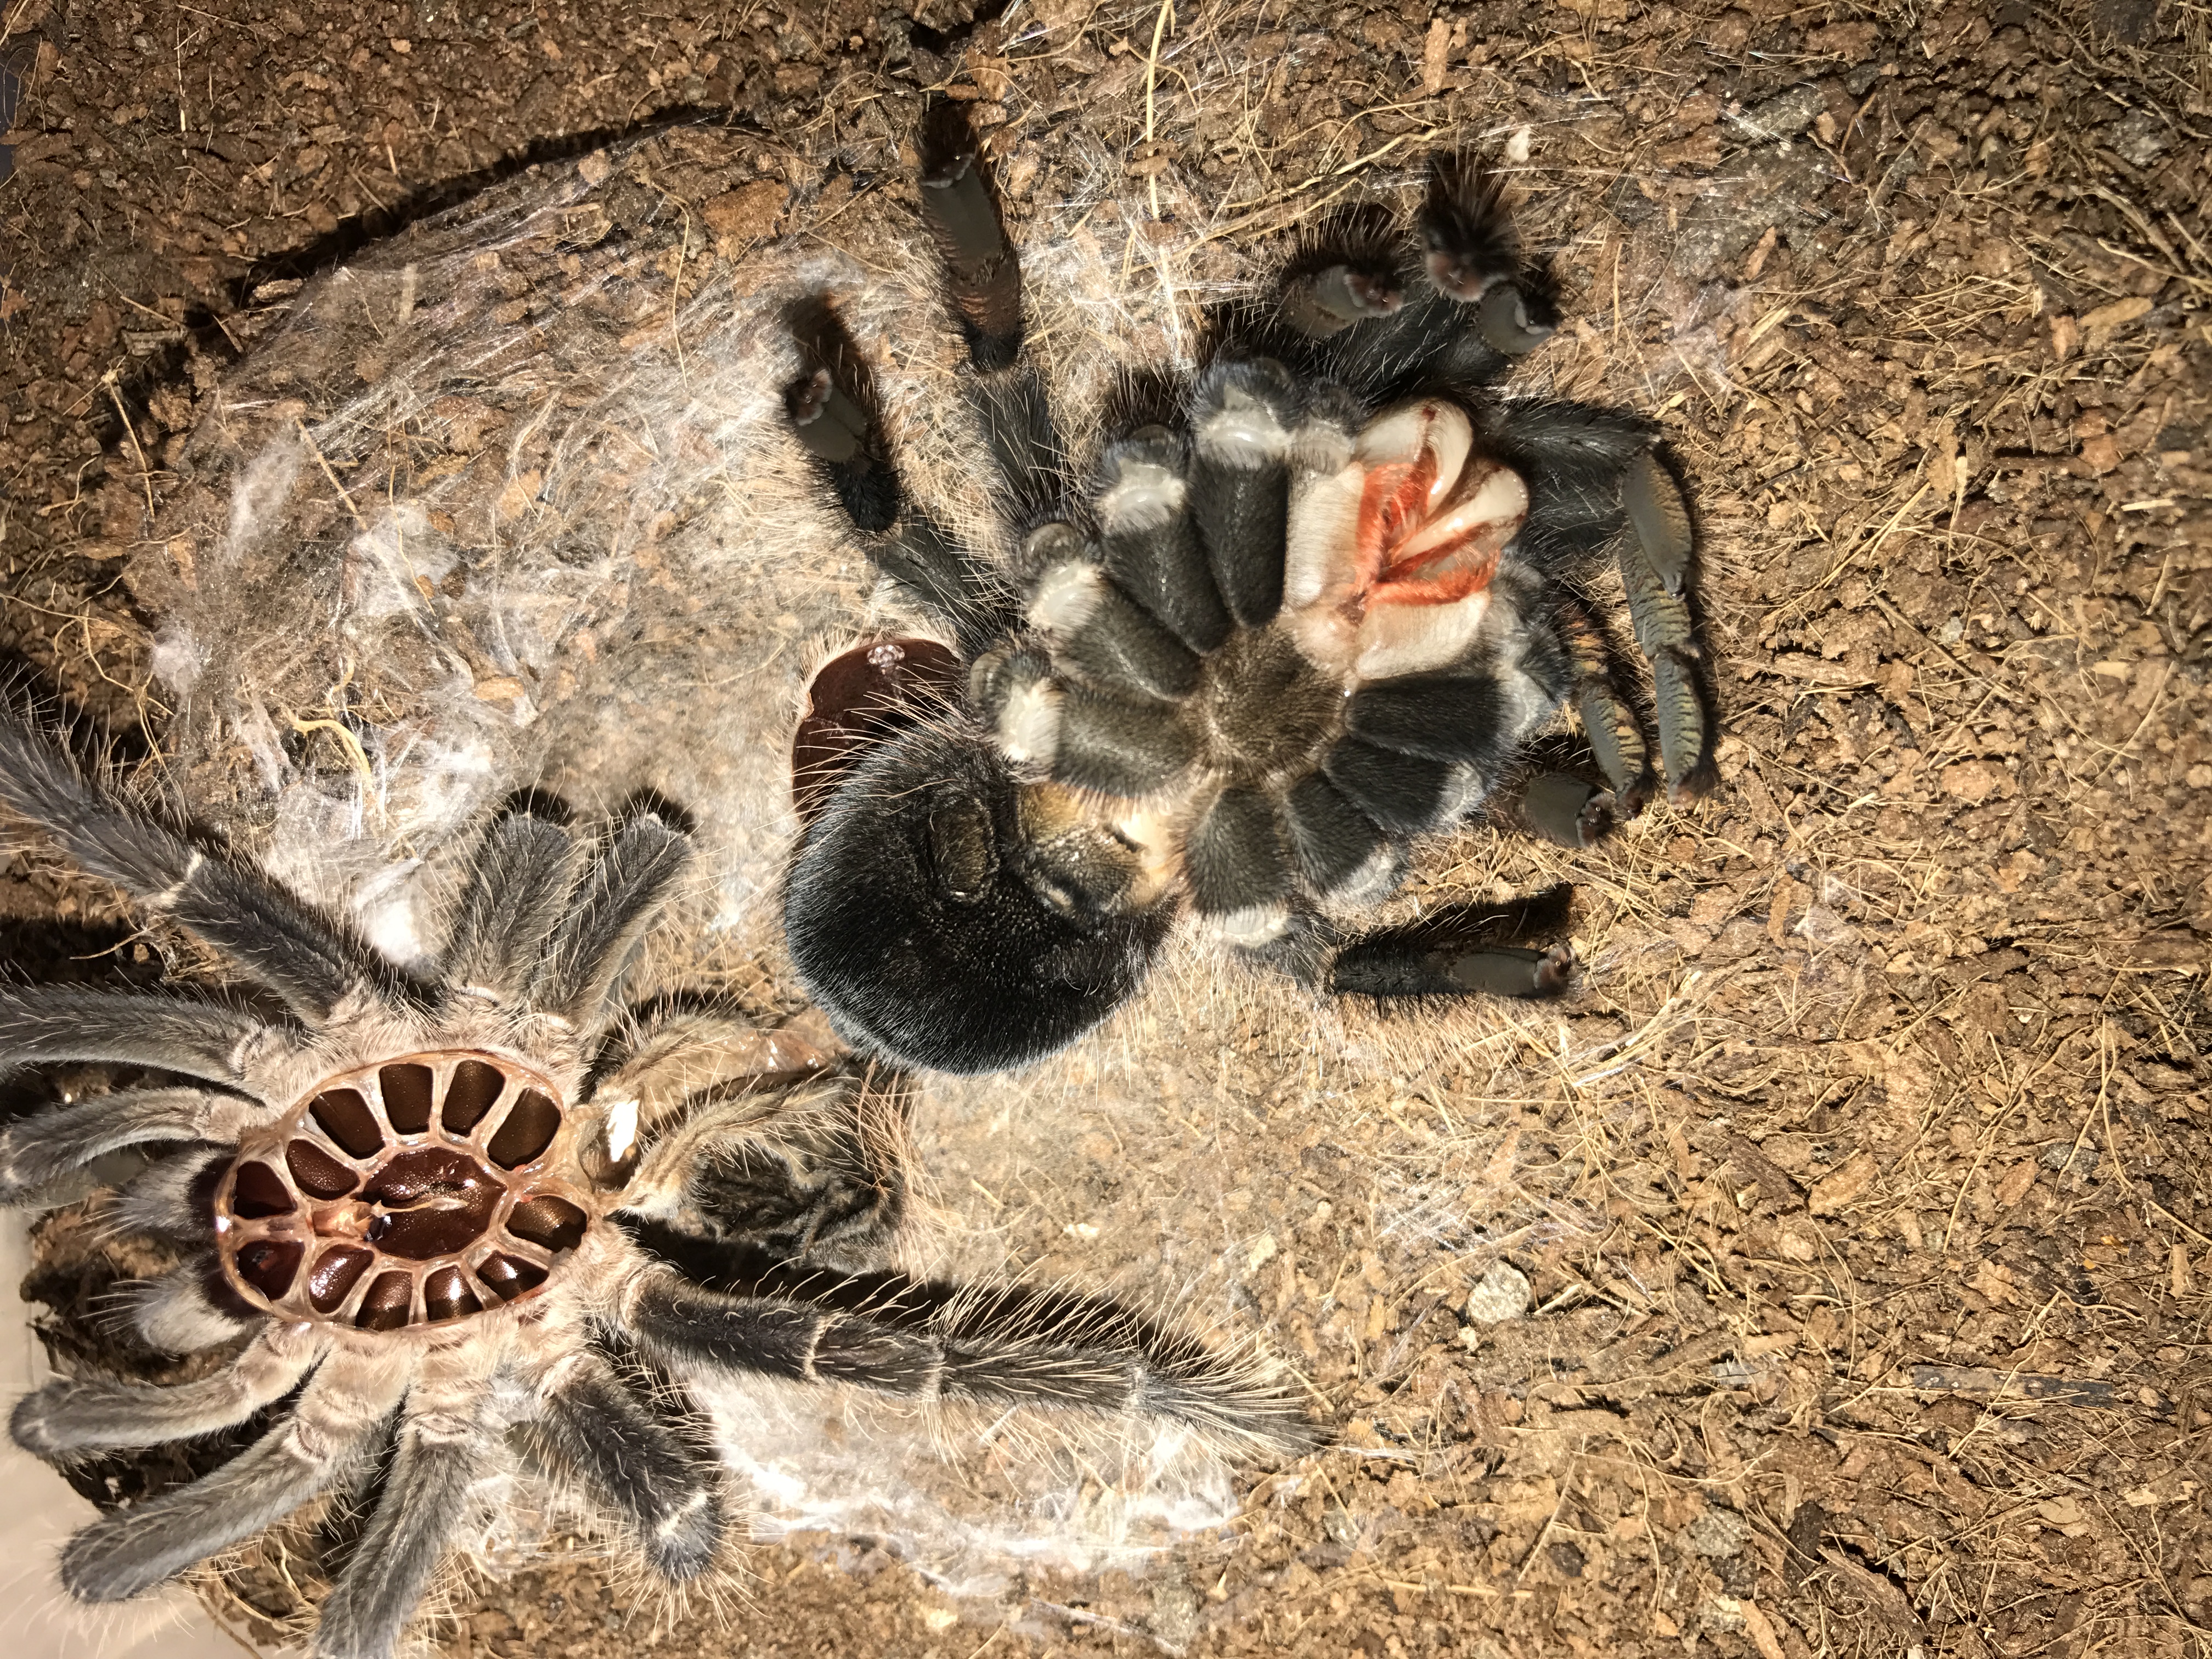 LP molted. Getting big